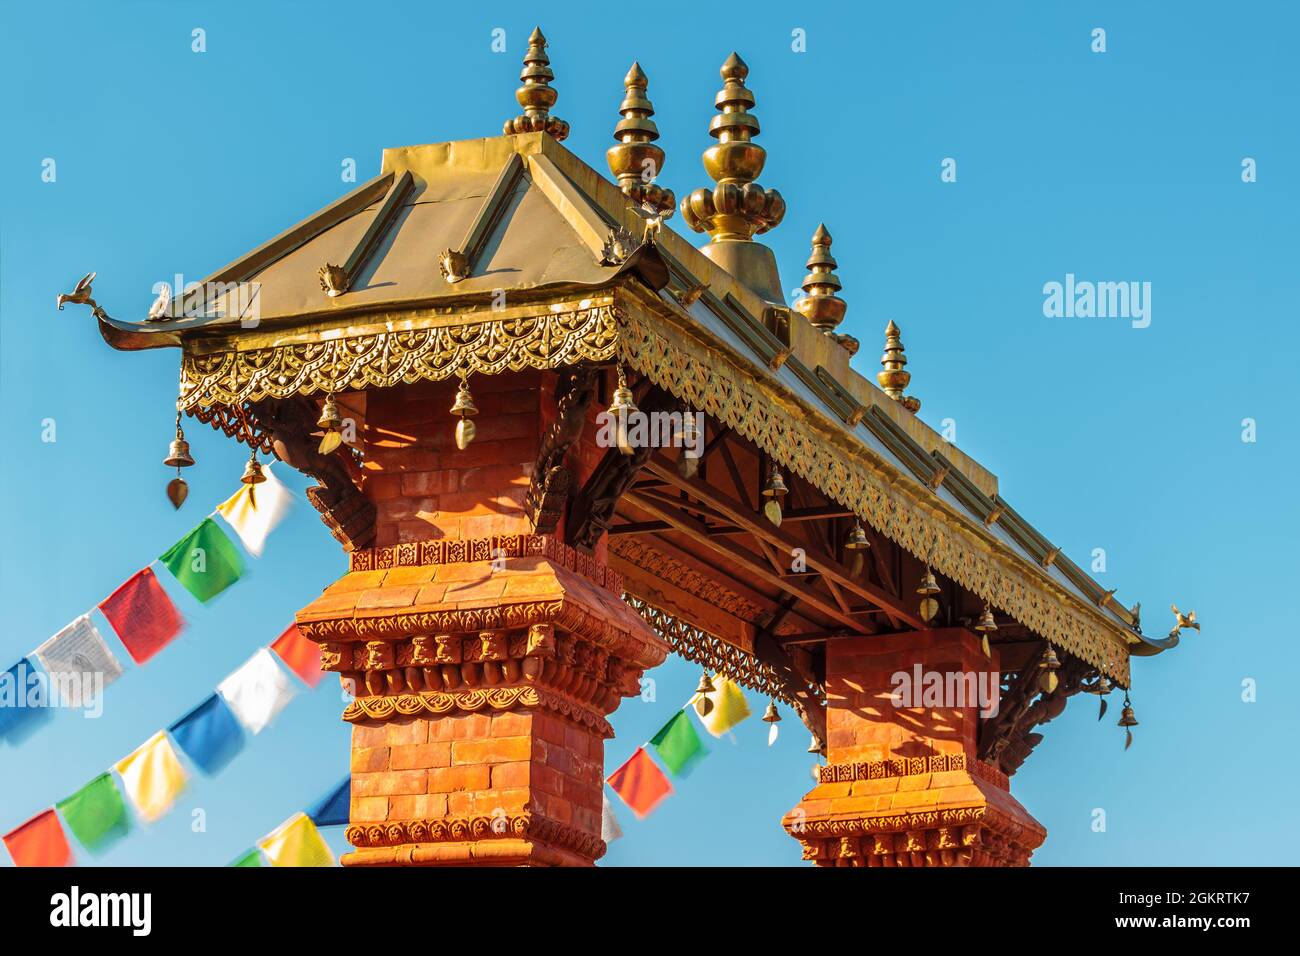 Nepalese ornamental entrance gate of a temple with colorful flags Stock Photo